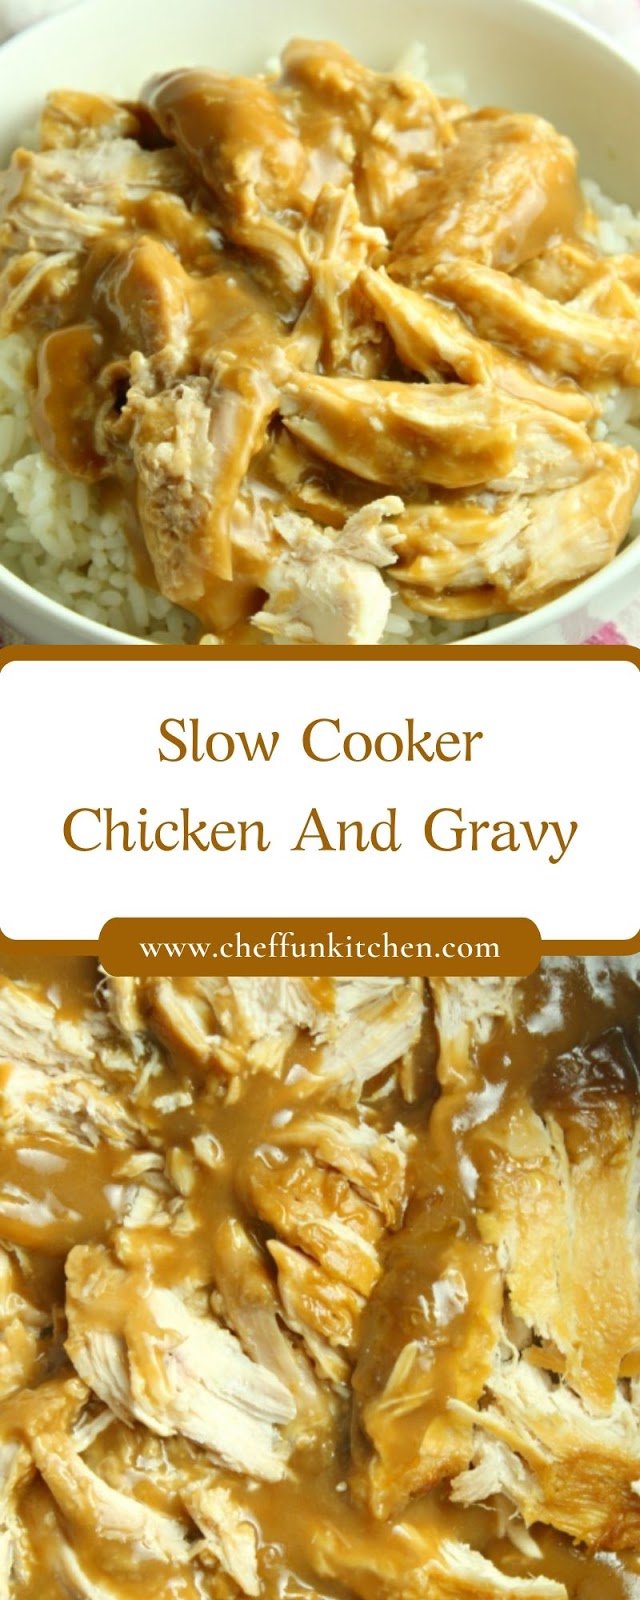 Slow Cooker Chicken And Gravy